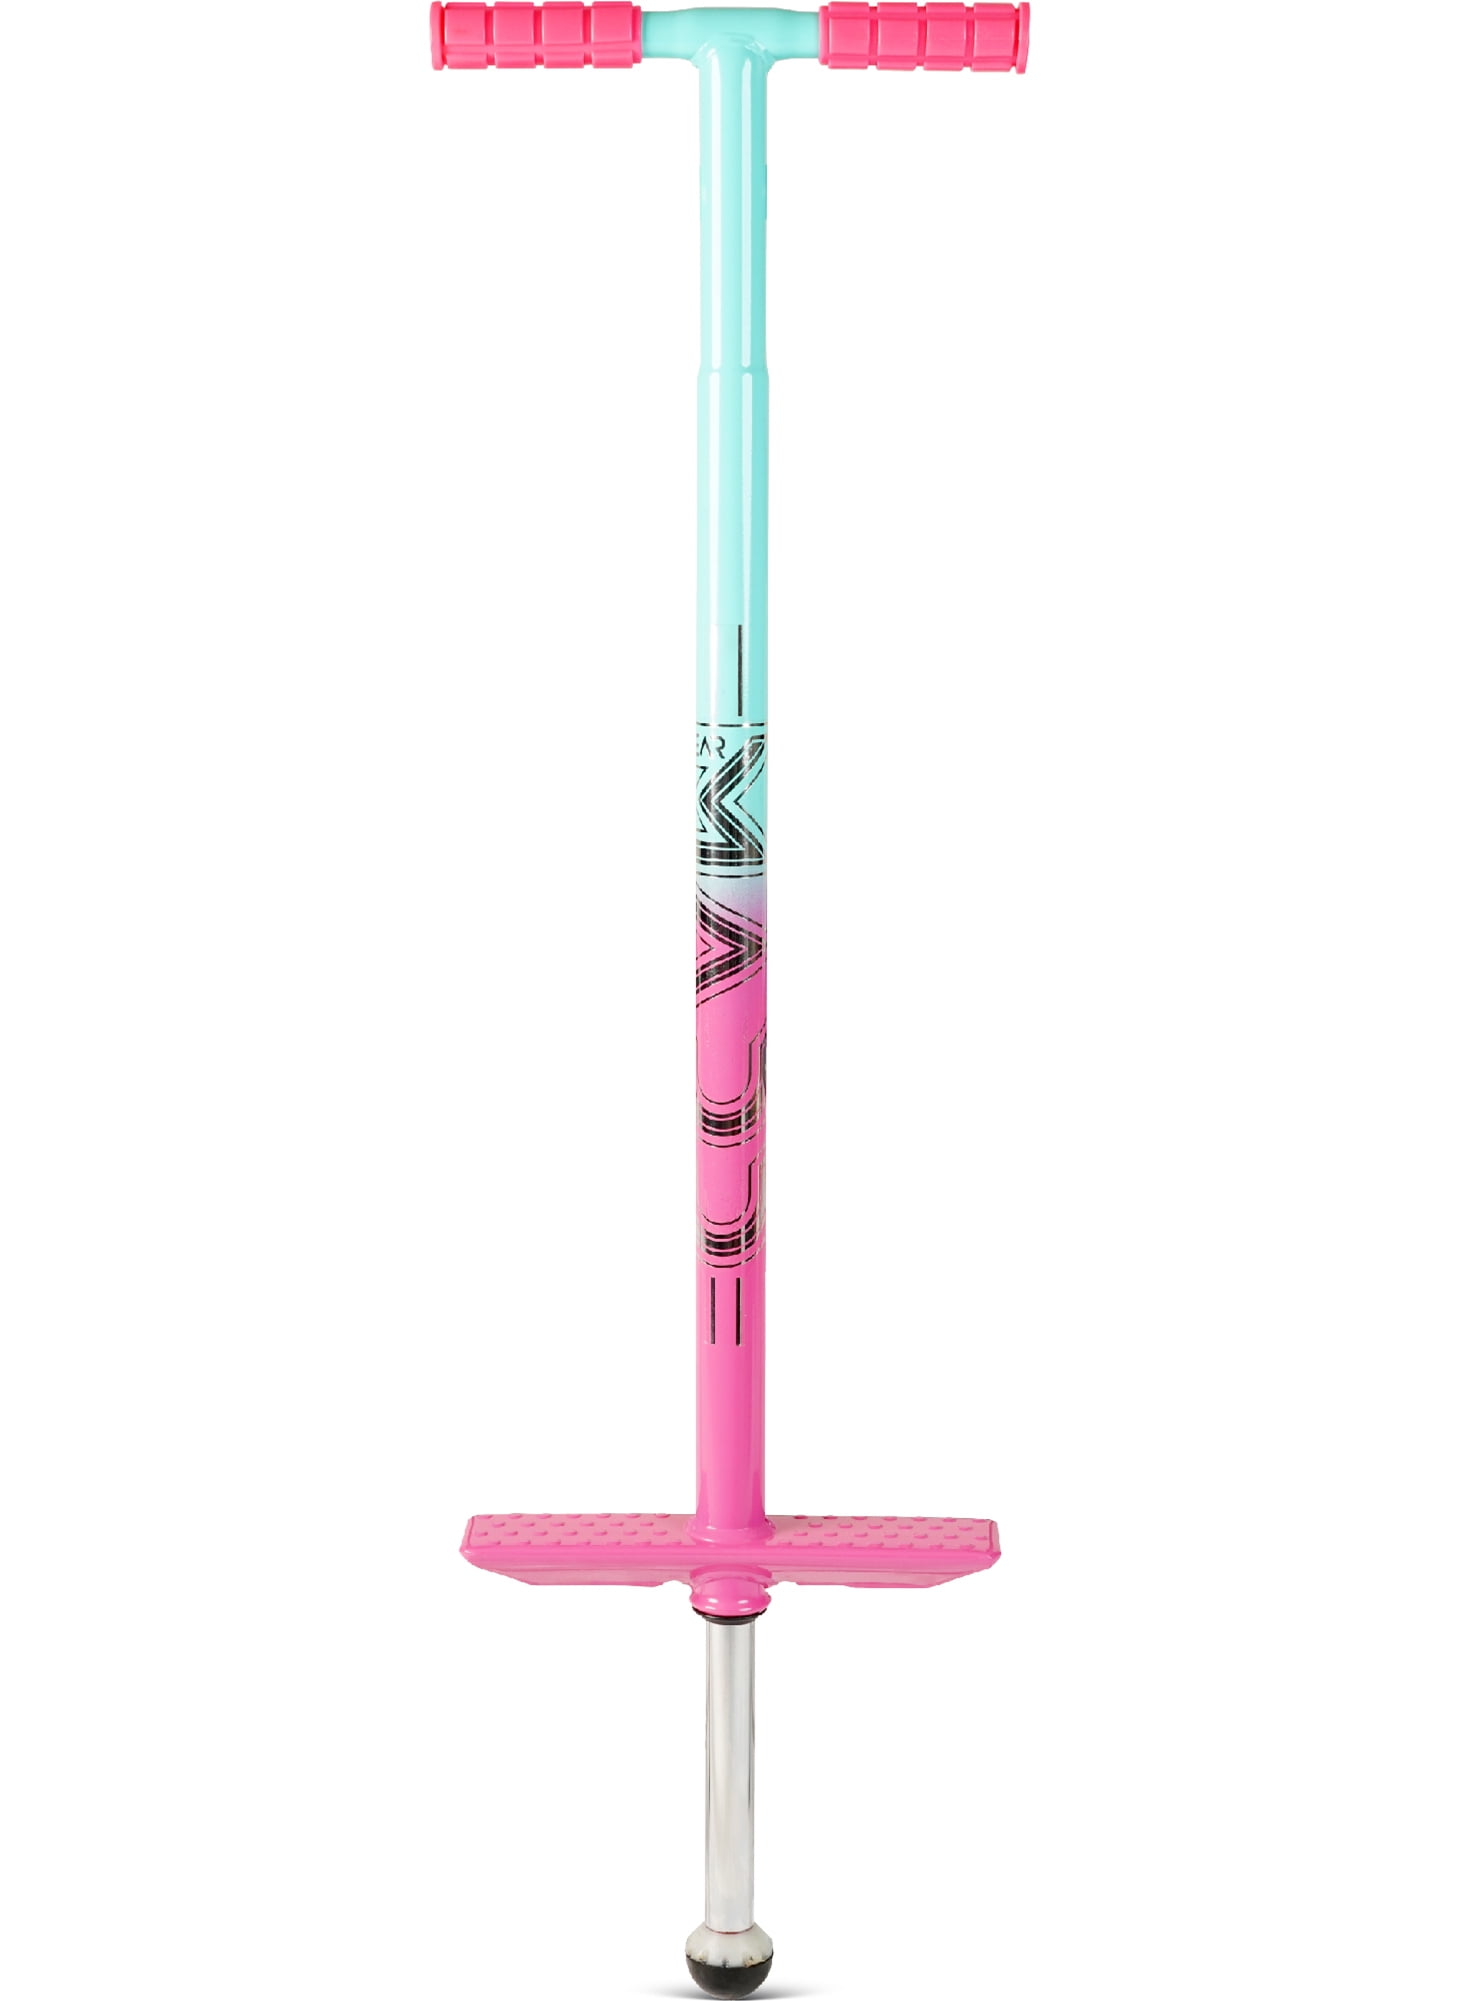 superwinky 3-12 Year Old Girl Gifts , Pogo Stick for Kids Age 5-12 Year Old